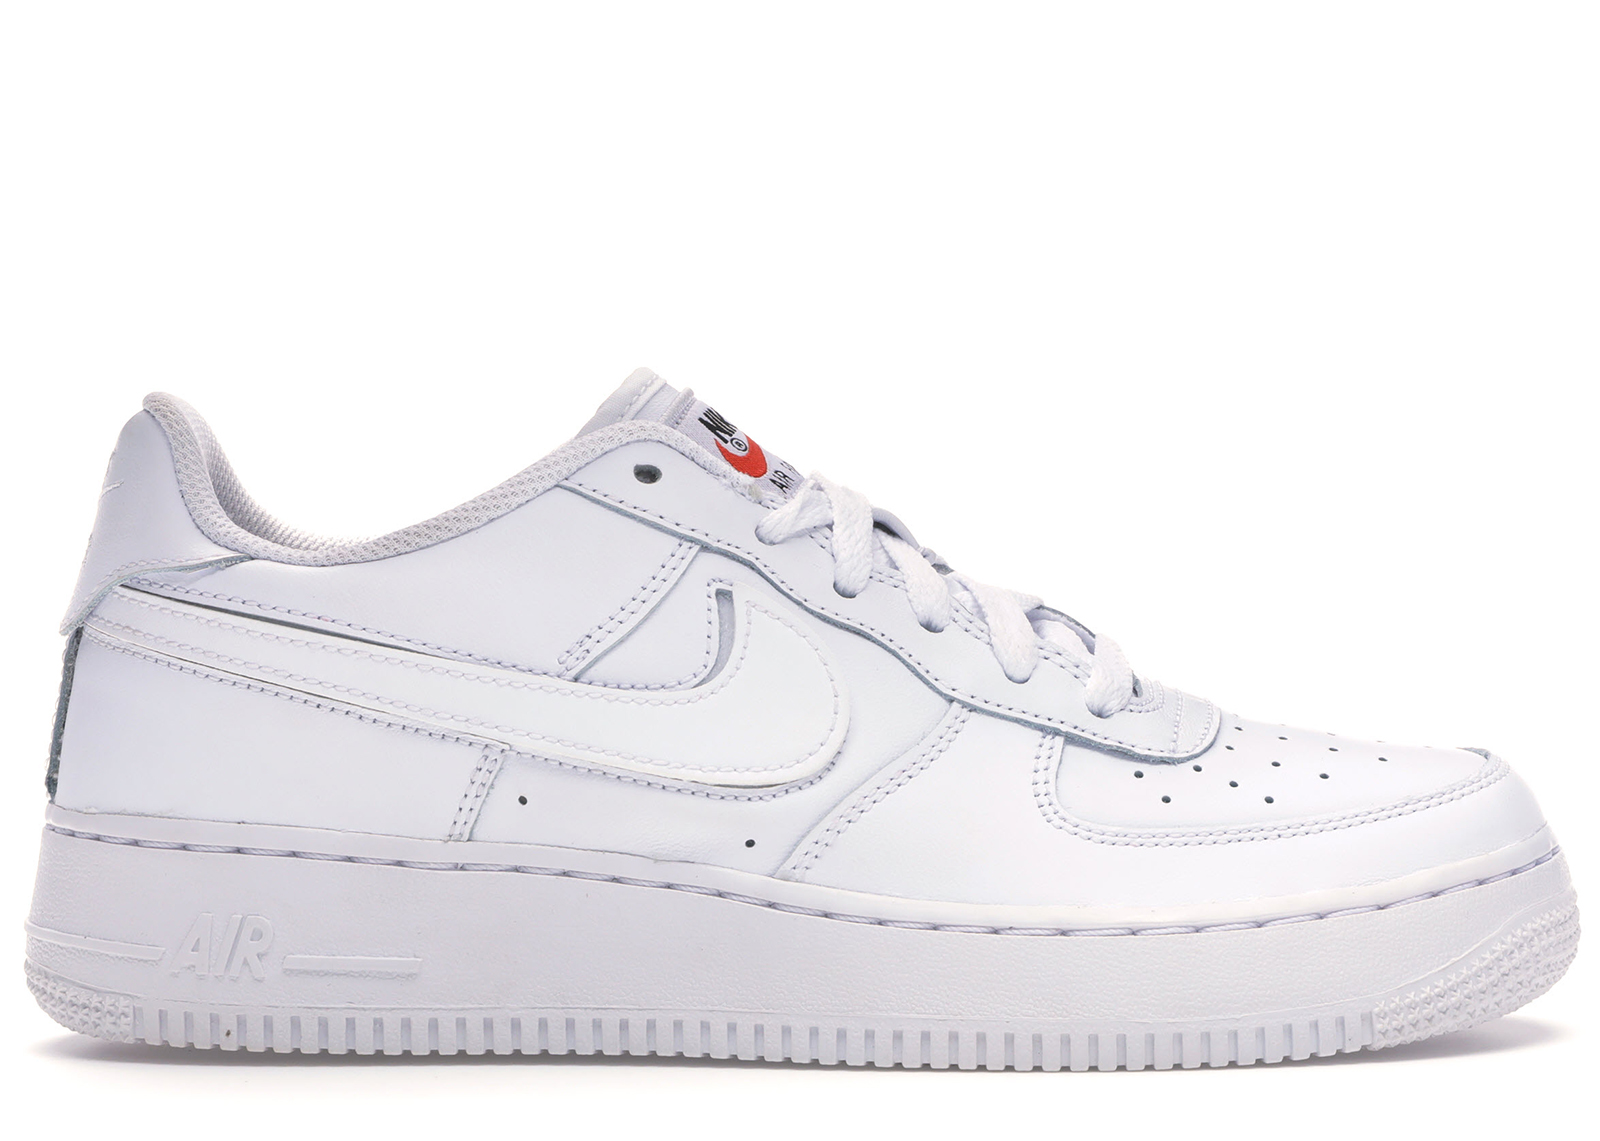 Nike Air Force 1 Low Swoosh Pack All-Star (2018) (White) Men's 